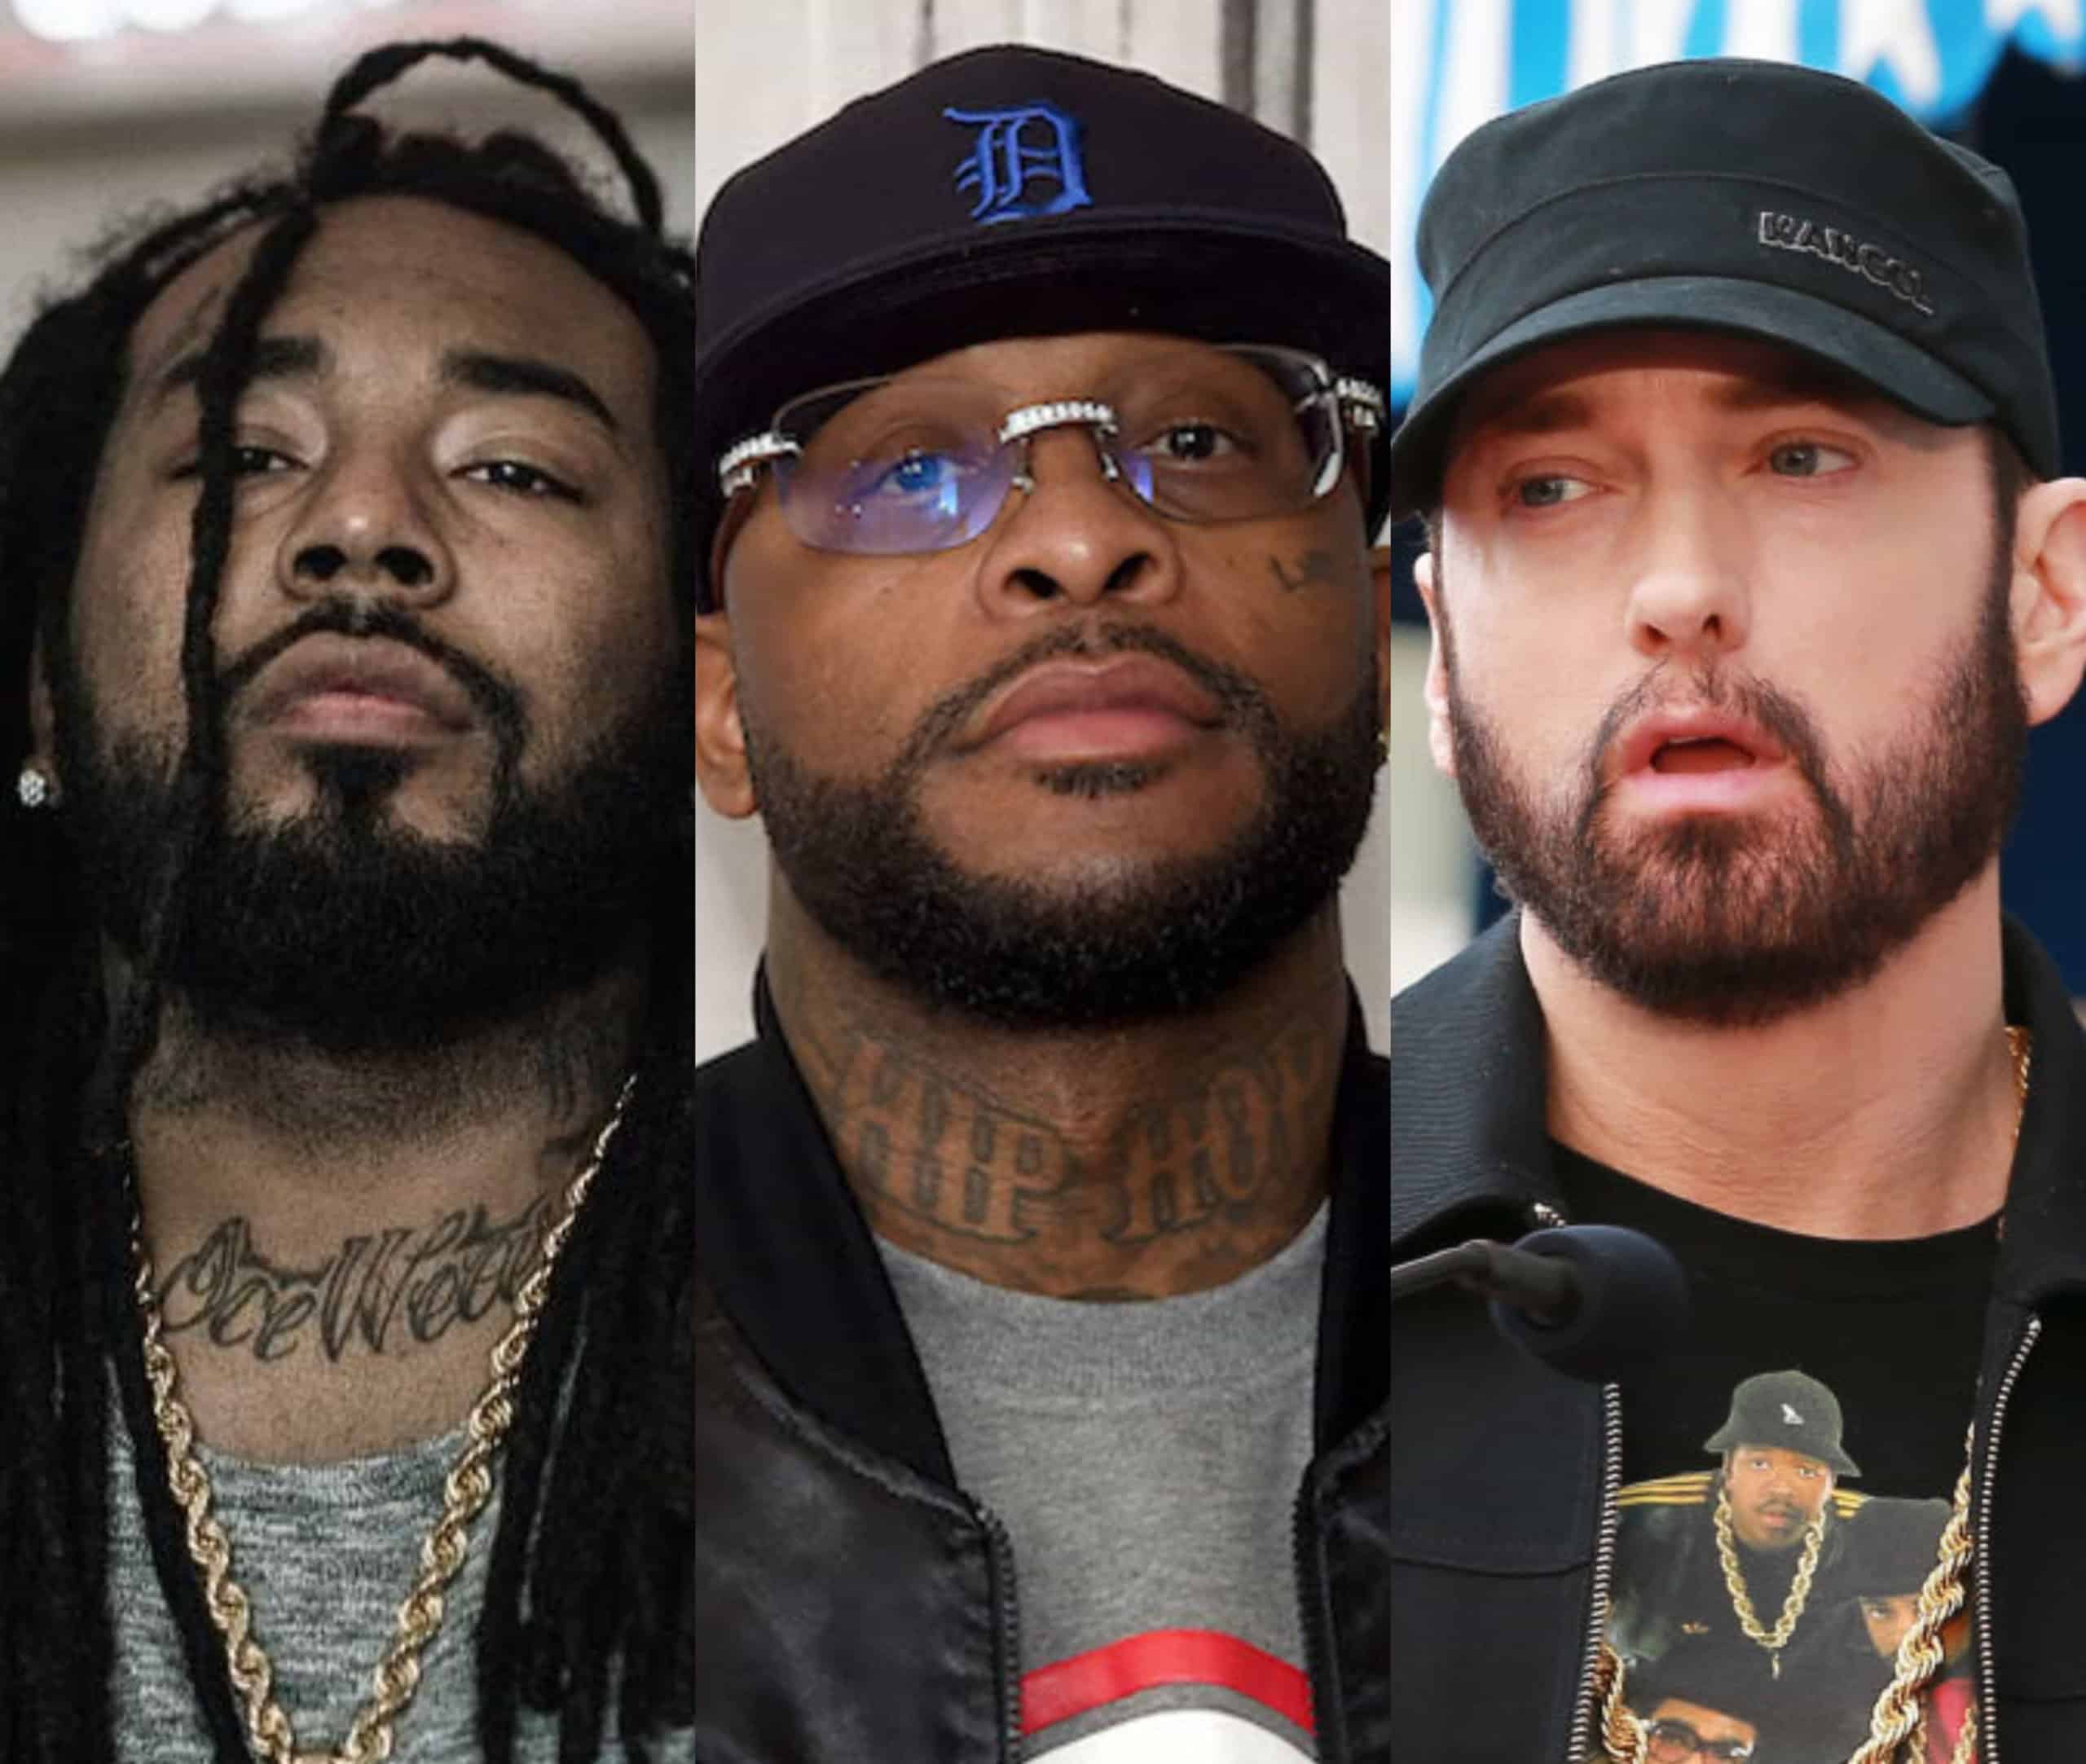 Icewear Vezzo Responds To Royce's Statement That Young Detroit Rappers Disrespect Eminem